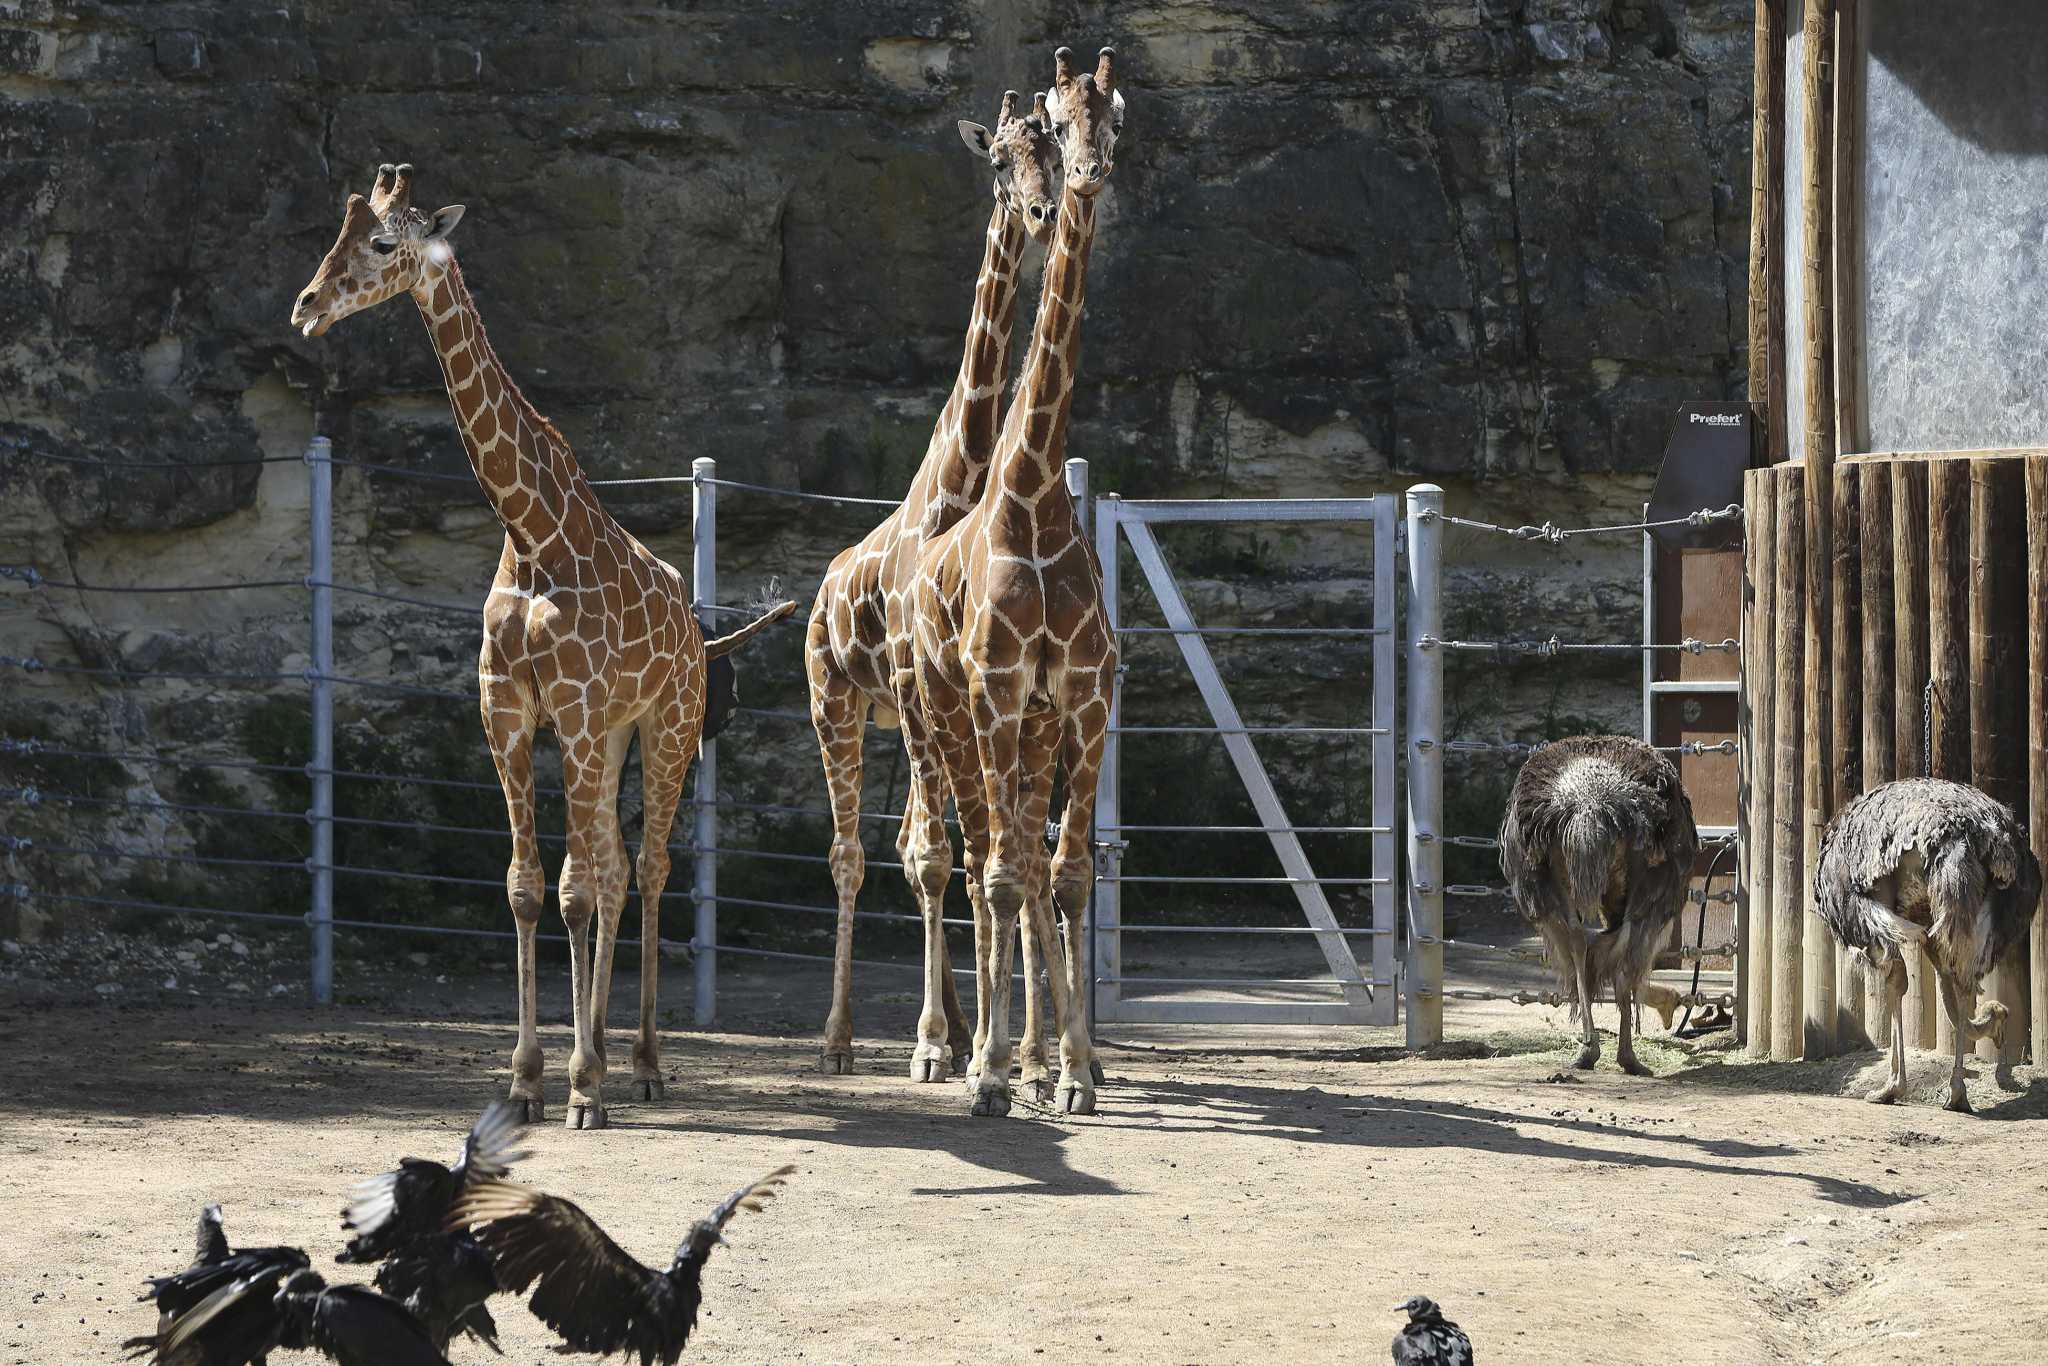 San Antonio Zoo will reopen for 'one-of-a-kind' drive-thru experience